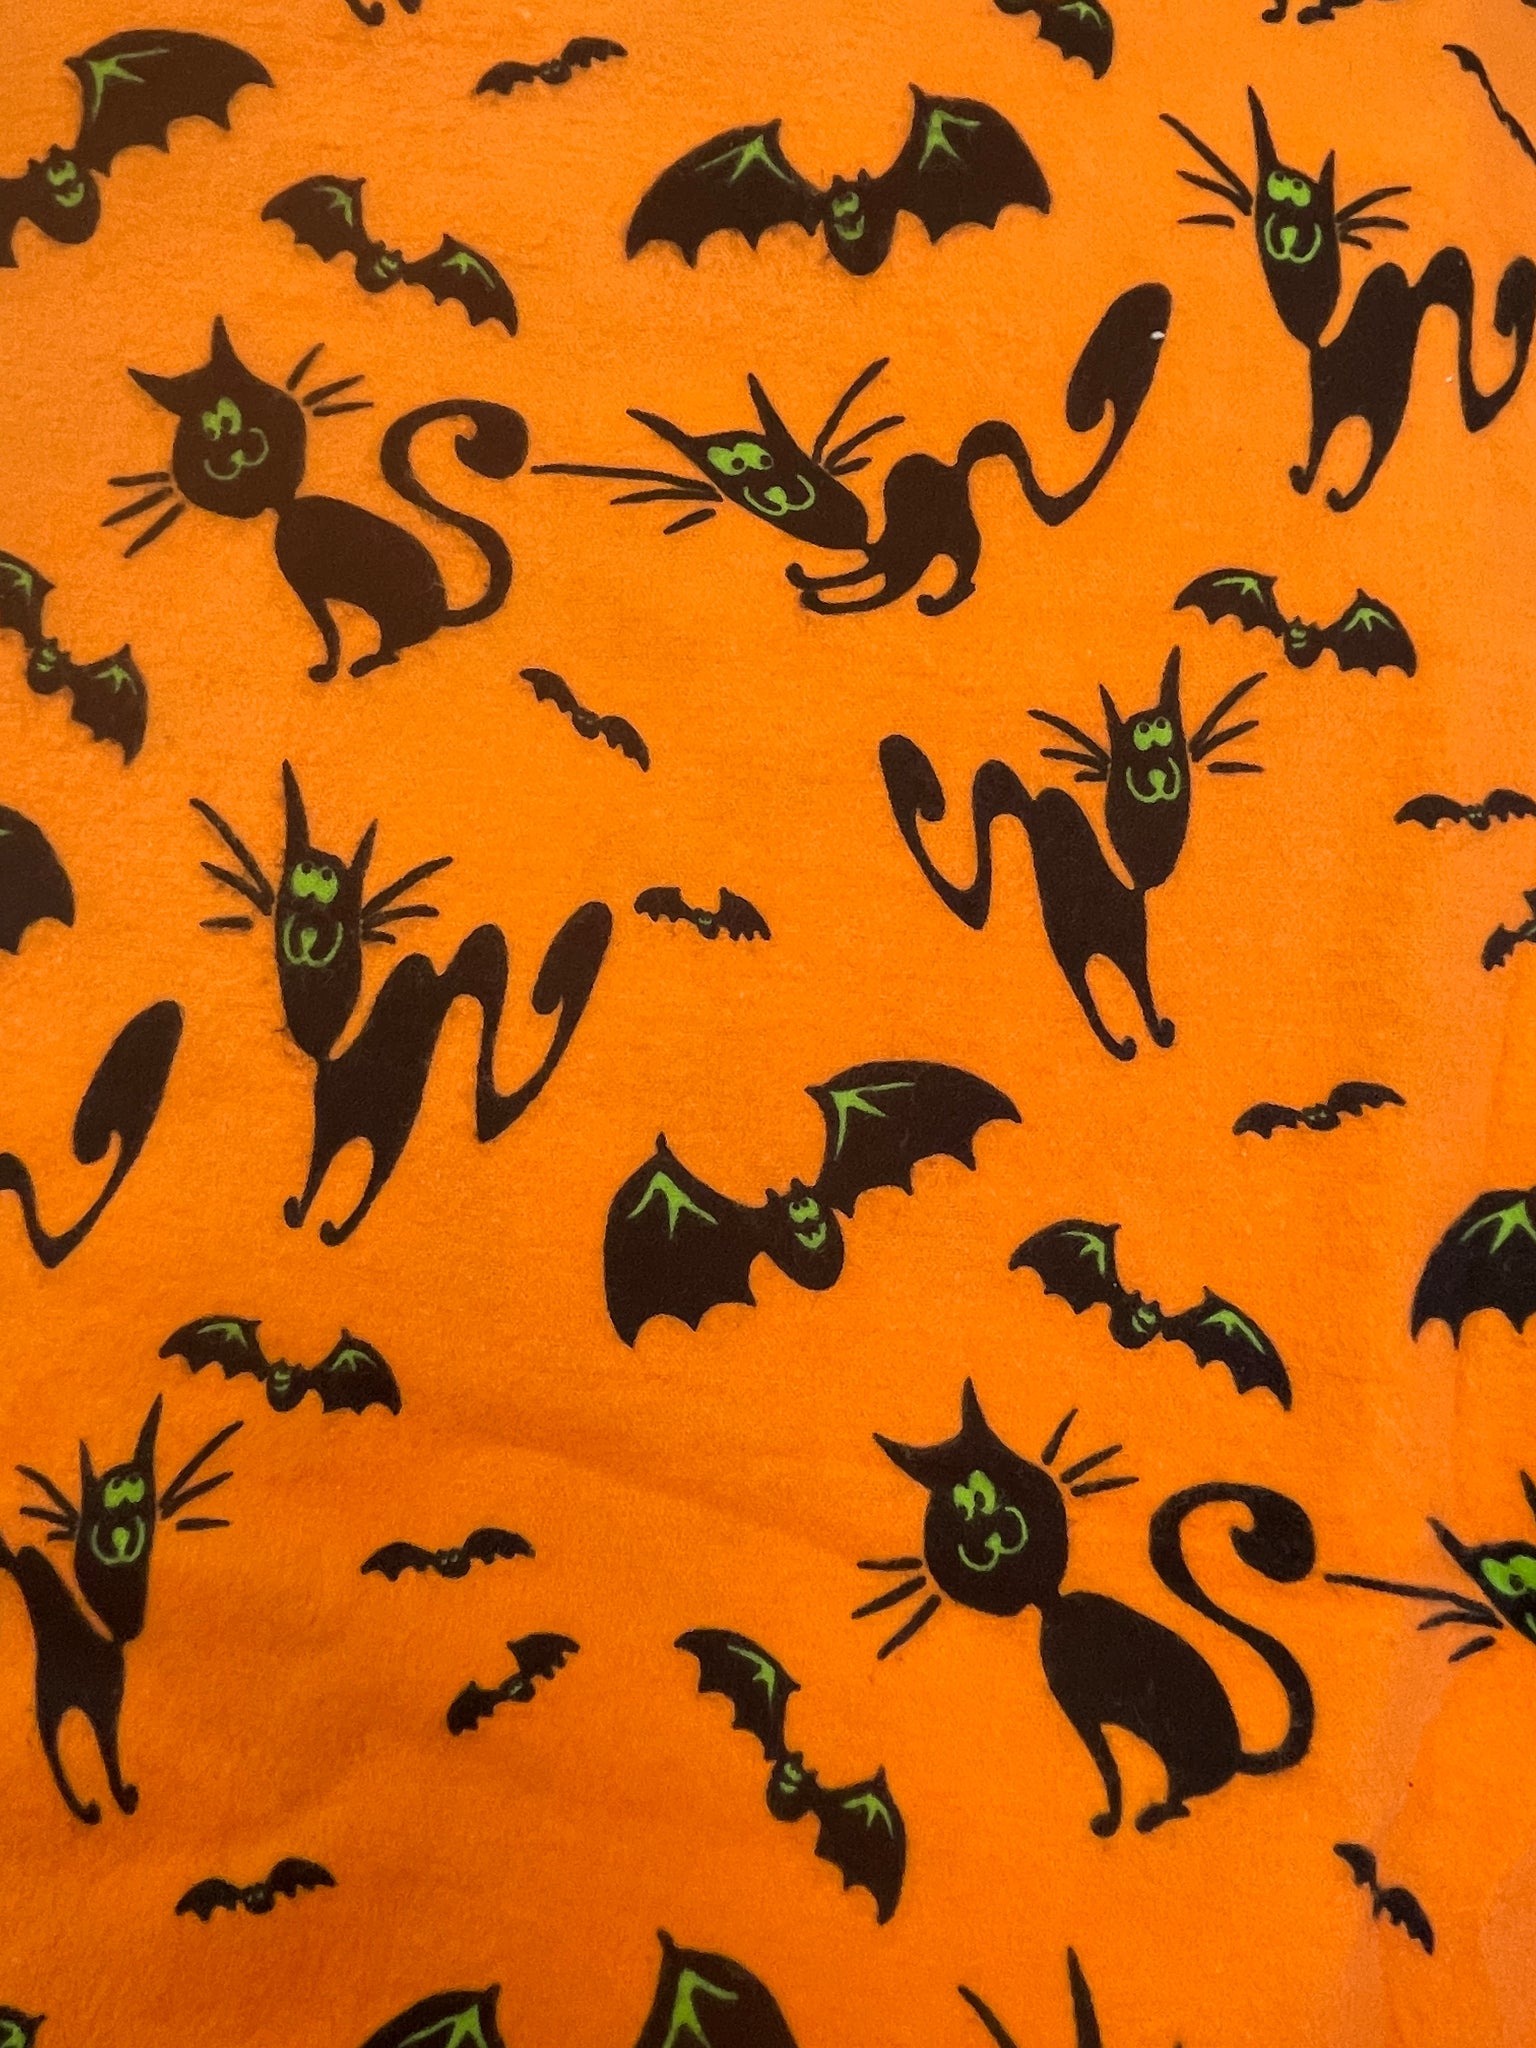 3 7/8 YD Cotton Flannel - Bright Orange with Black Cats and Bats